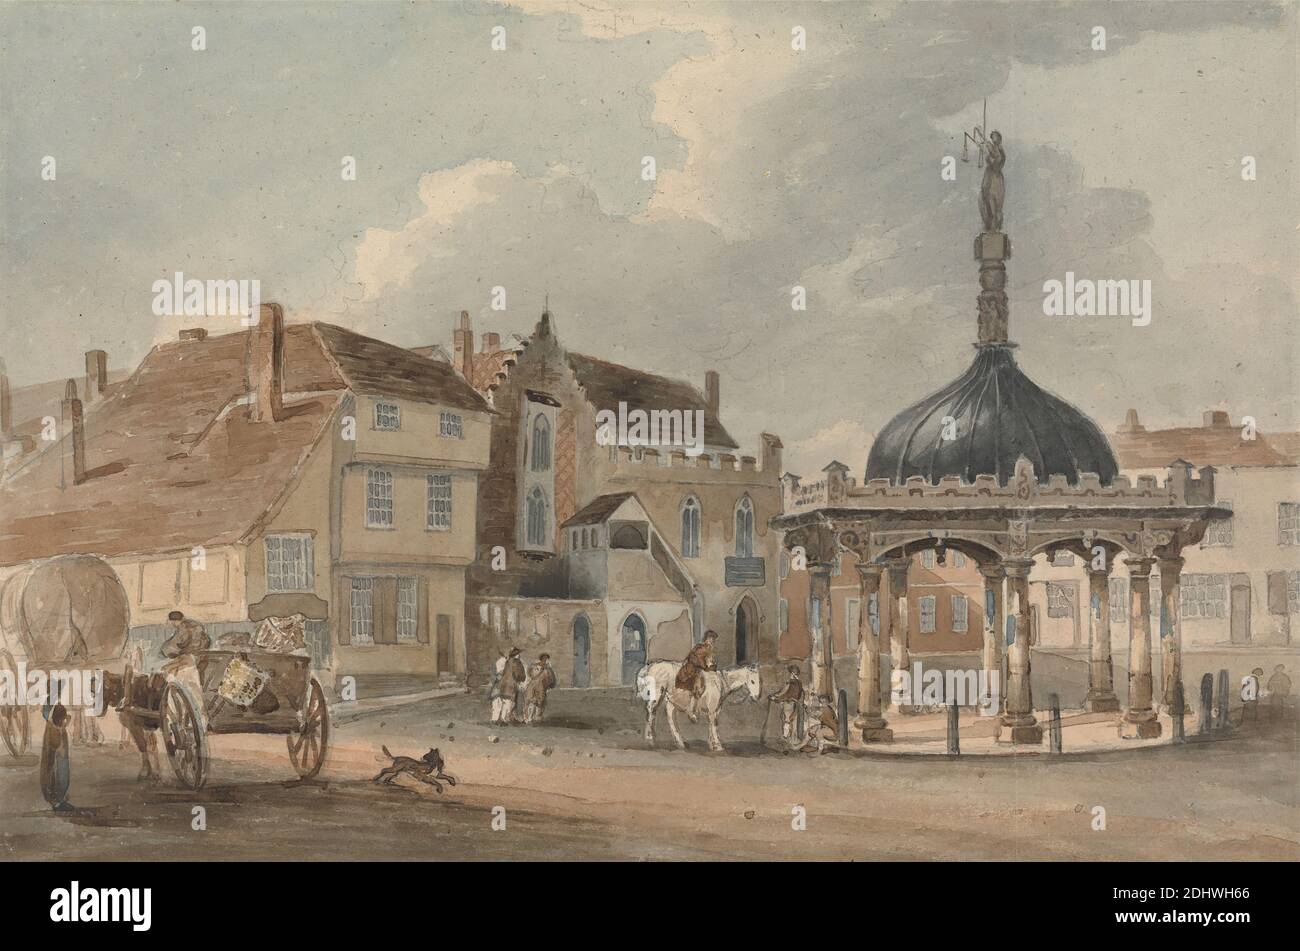 Corn Hill and Moot Hall, Ipswich, George Frost, 1745–1821, British, undated, Watercolor and graphite on medium, slightly textured, cream wove paper, Sheet: 8 7/8 × 13 1/4 inches (22.5 × 33.7 cm), arches, architectural subject, carts, columns, dome, horses (animals), plaza, statue, England, Europe, Ipswich, Suffolk, United Kingdom Stock Photo